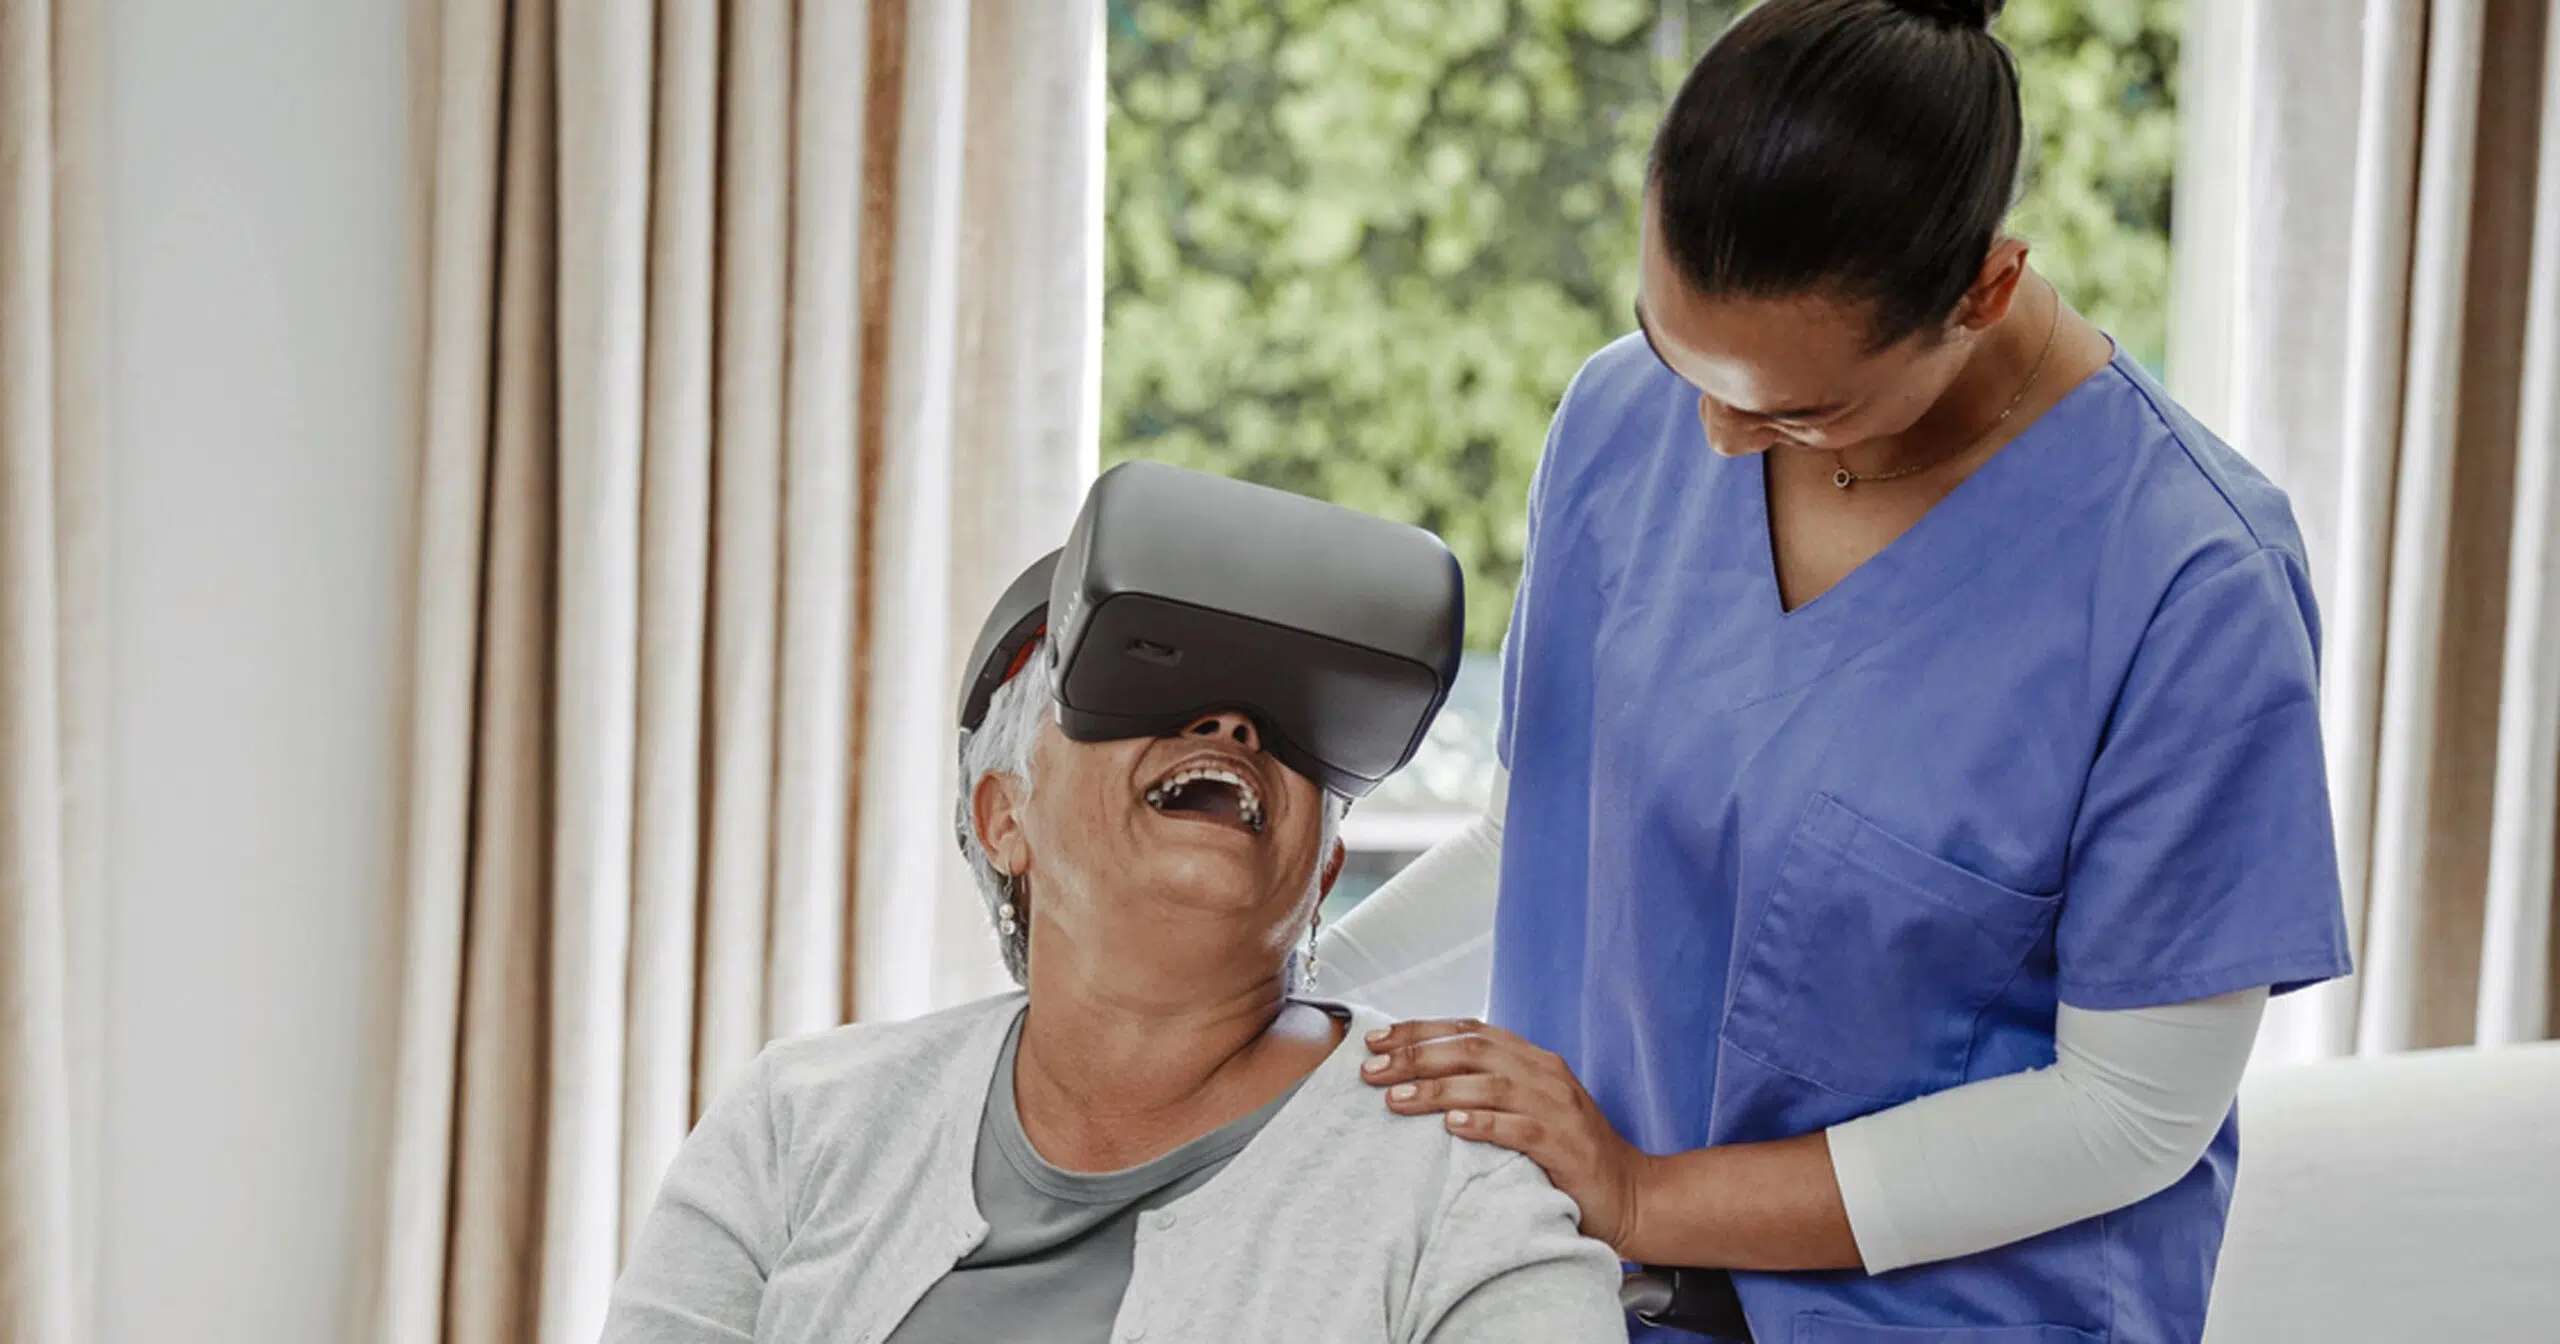 Virtual reality for cognitive treatment